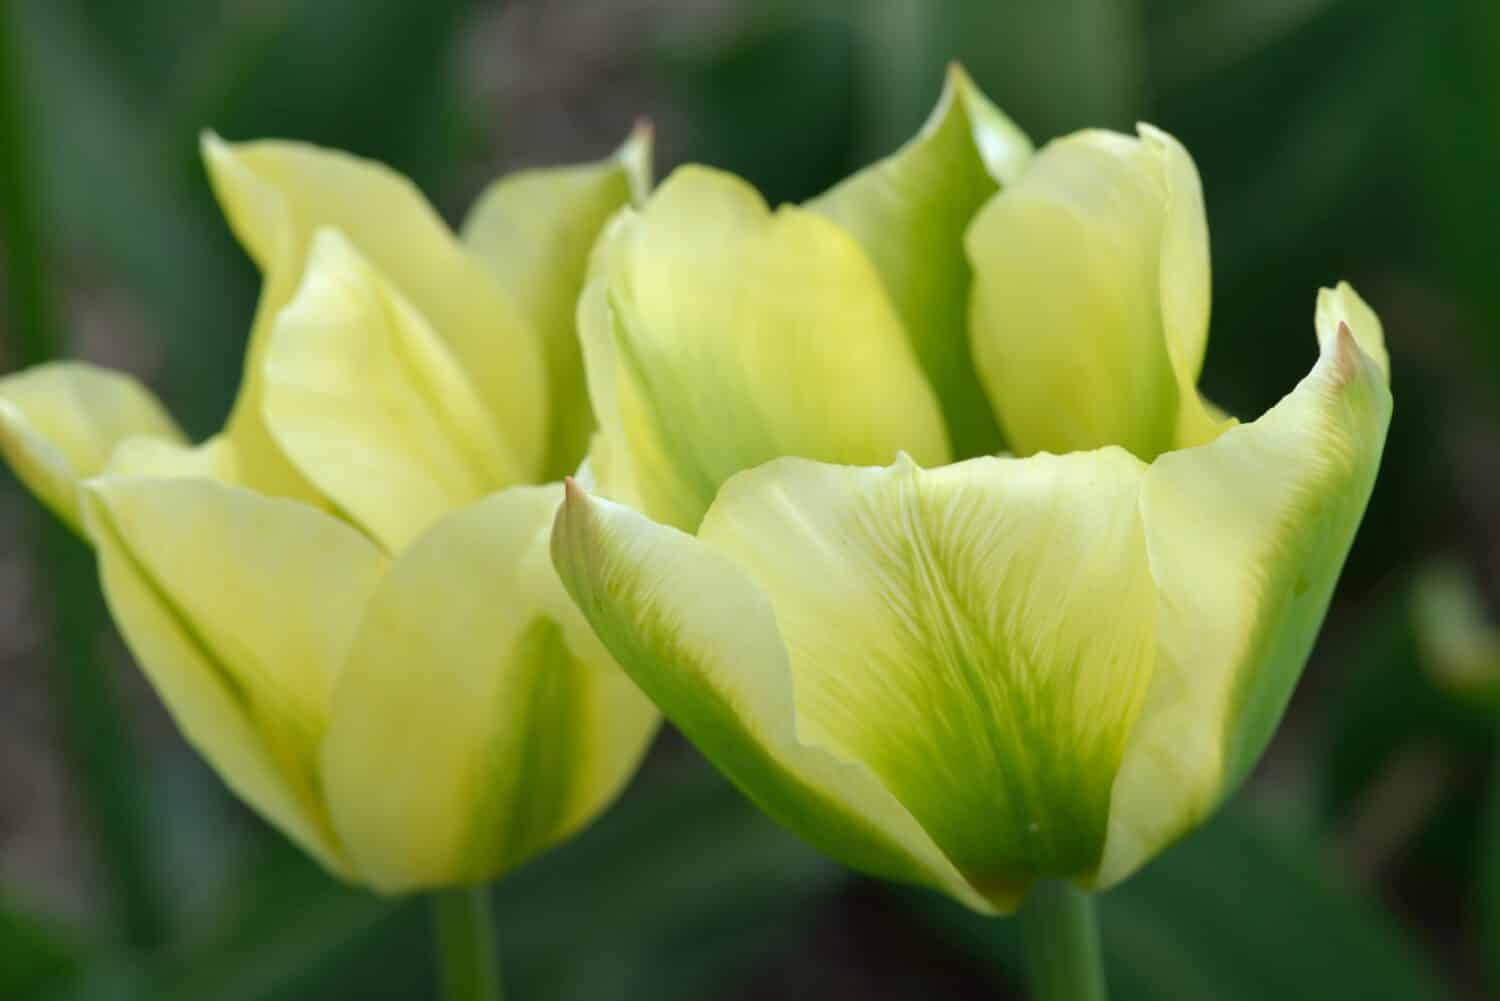 Tulipa 'Spring Green' is a Viridiflora tulip (Div. 8) with green and white flowers